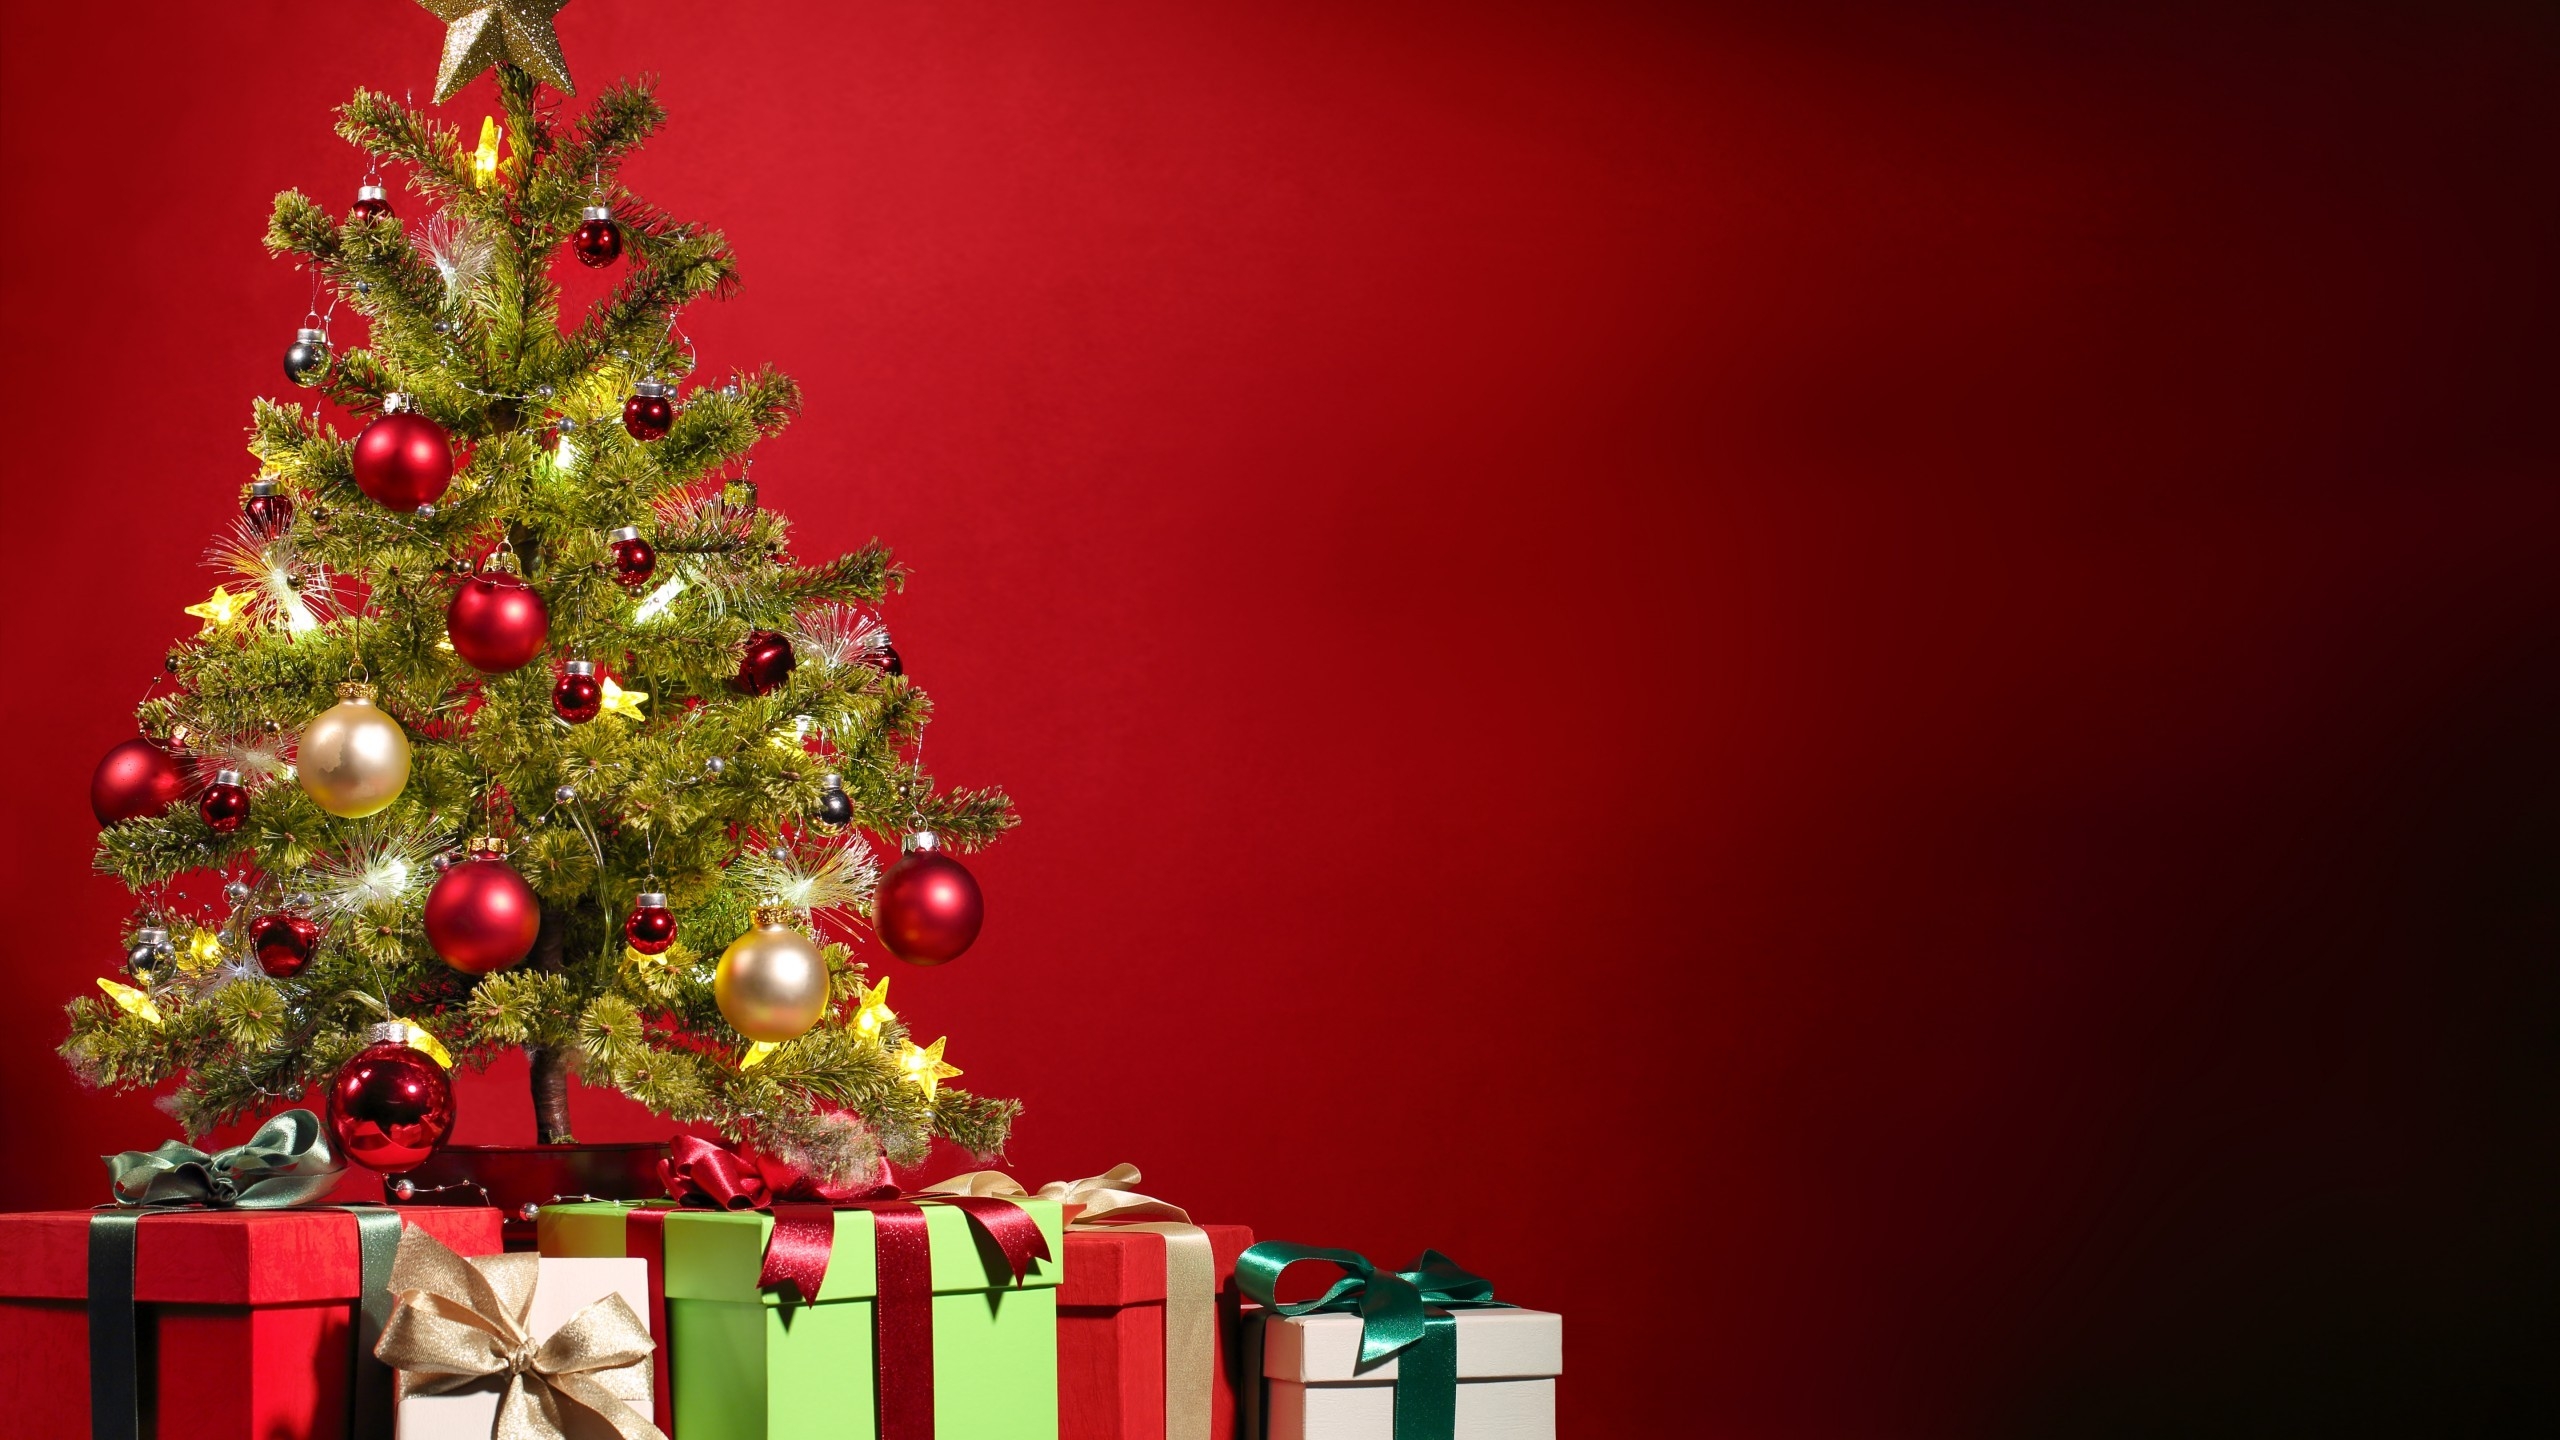 Special Christmas Tree and Gifts for 2560x1440 HDTV resolution